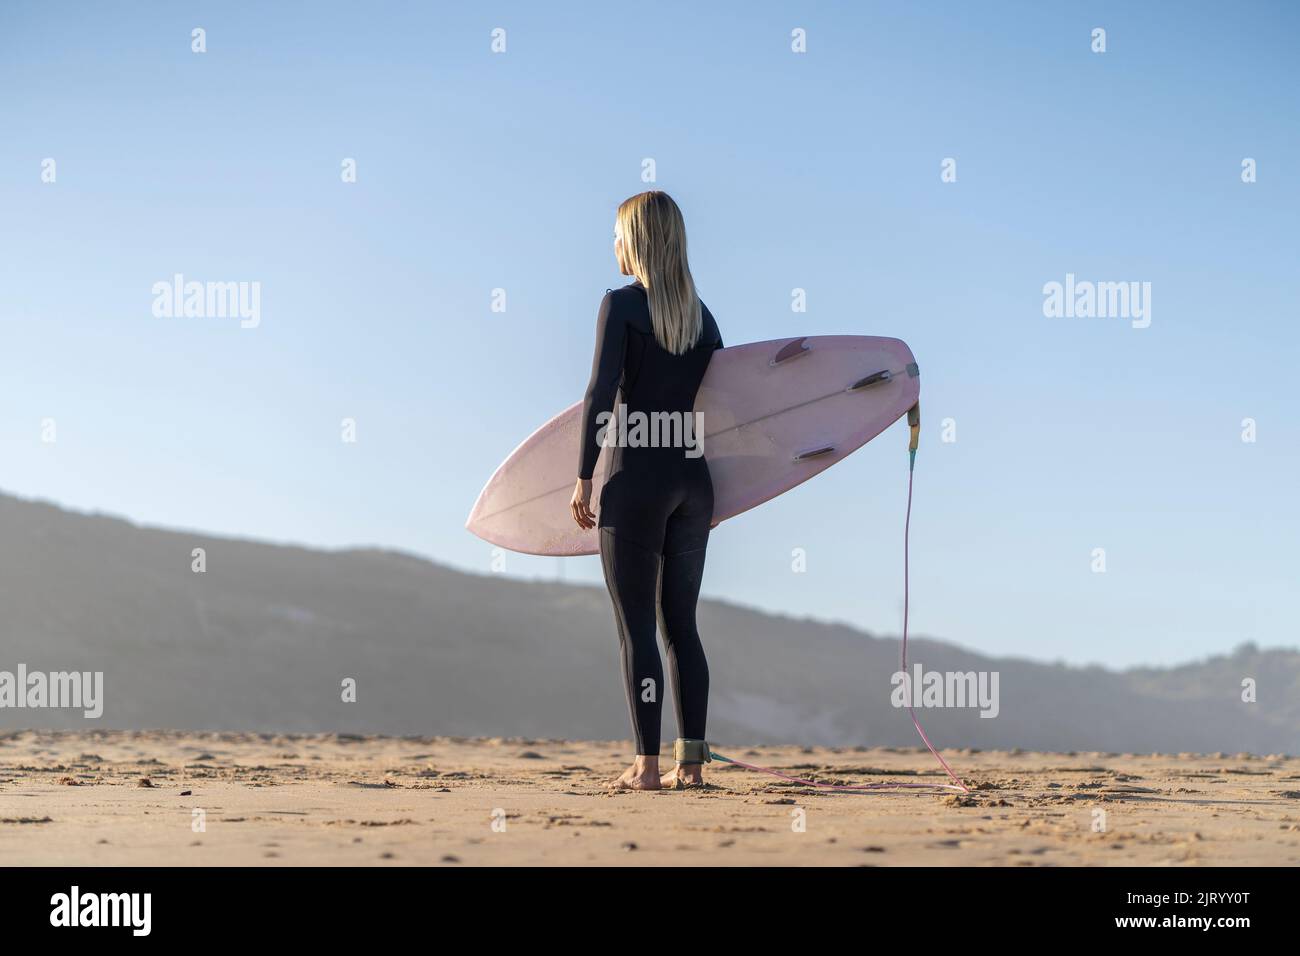 Surfer girl at the beach standing with her surfboard in the morning. Female surfer Stock Photo